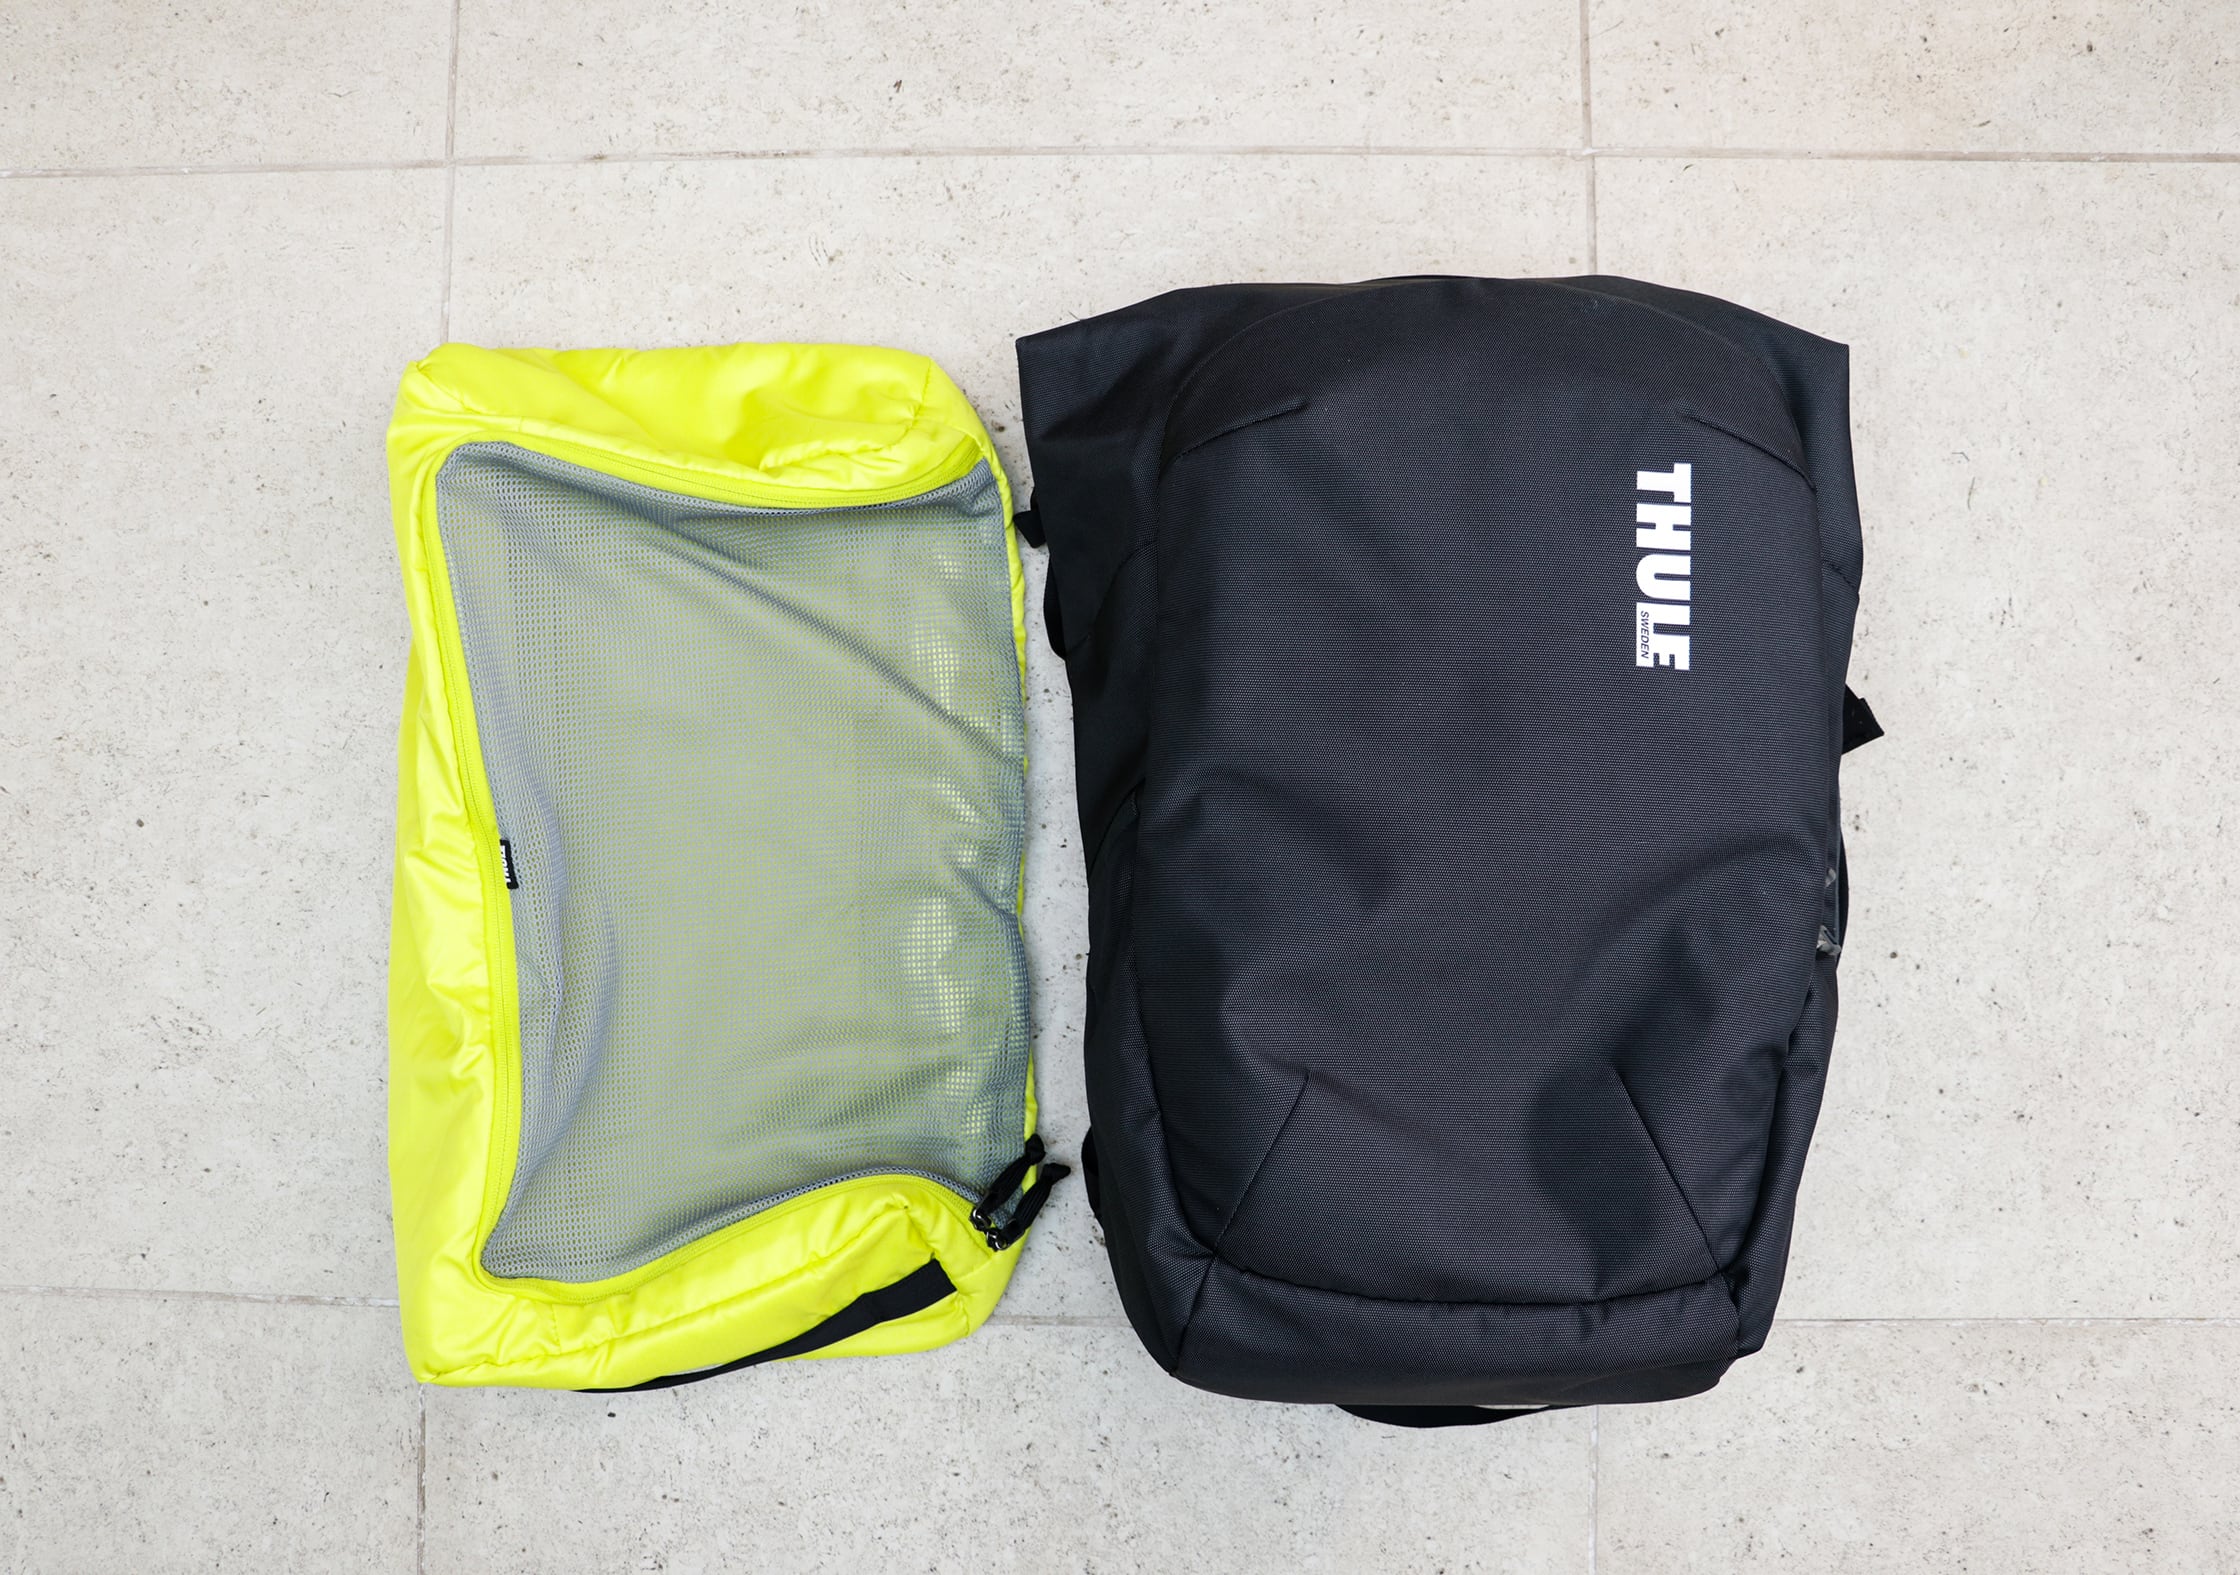 Thule Subterra Packing Cube